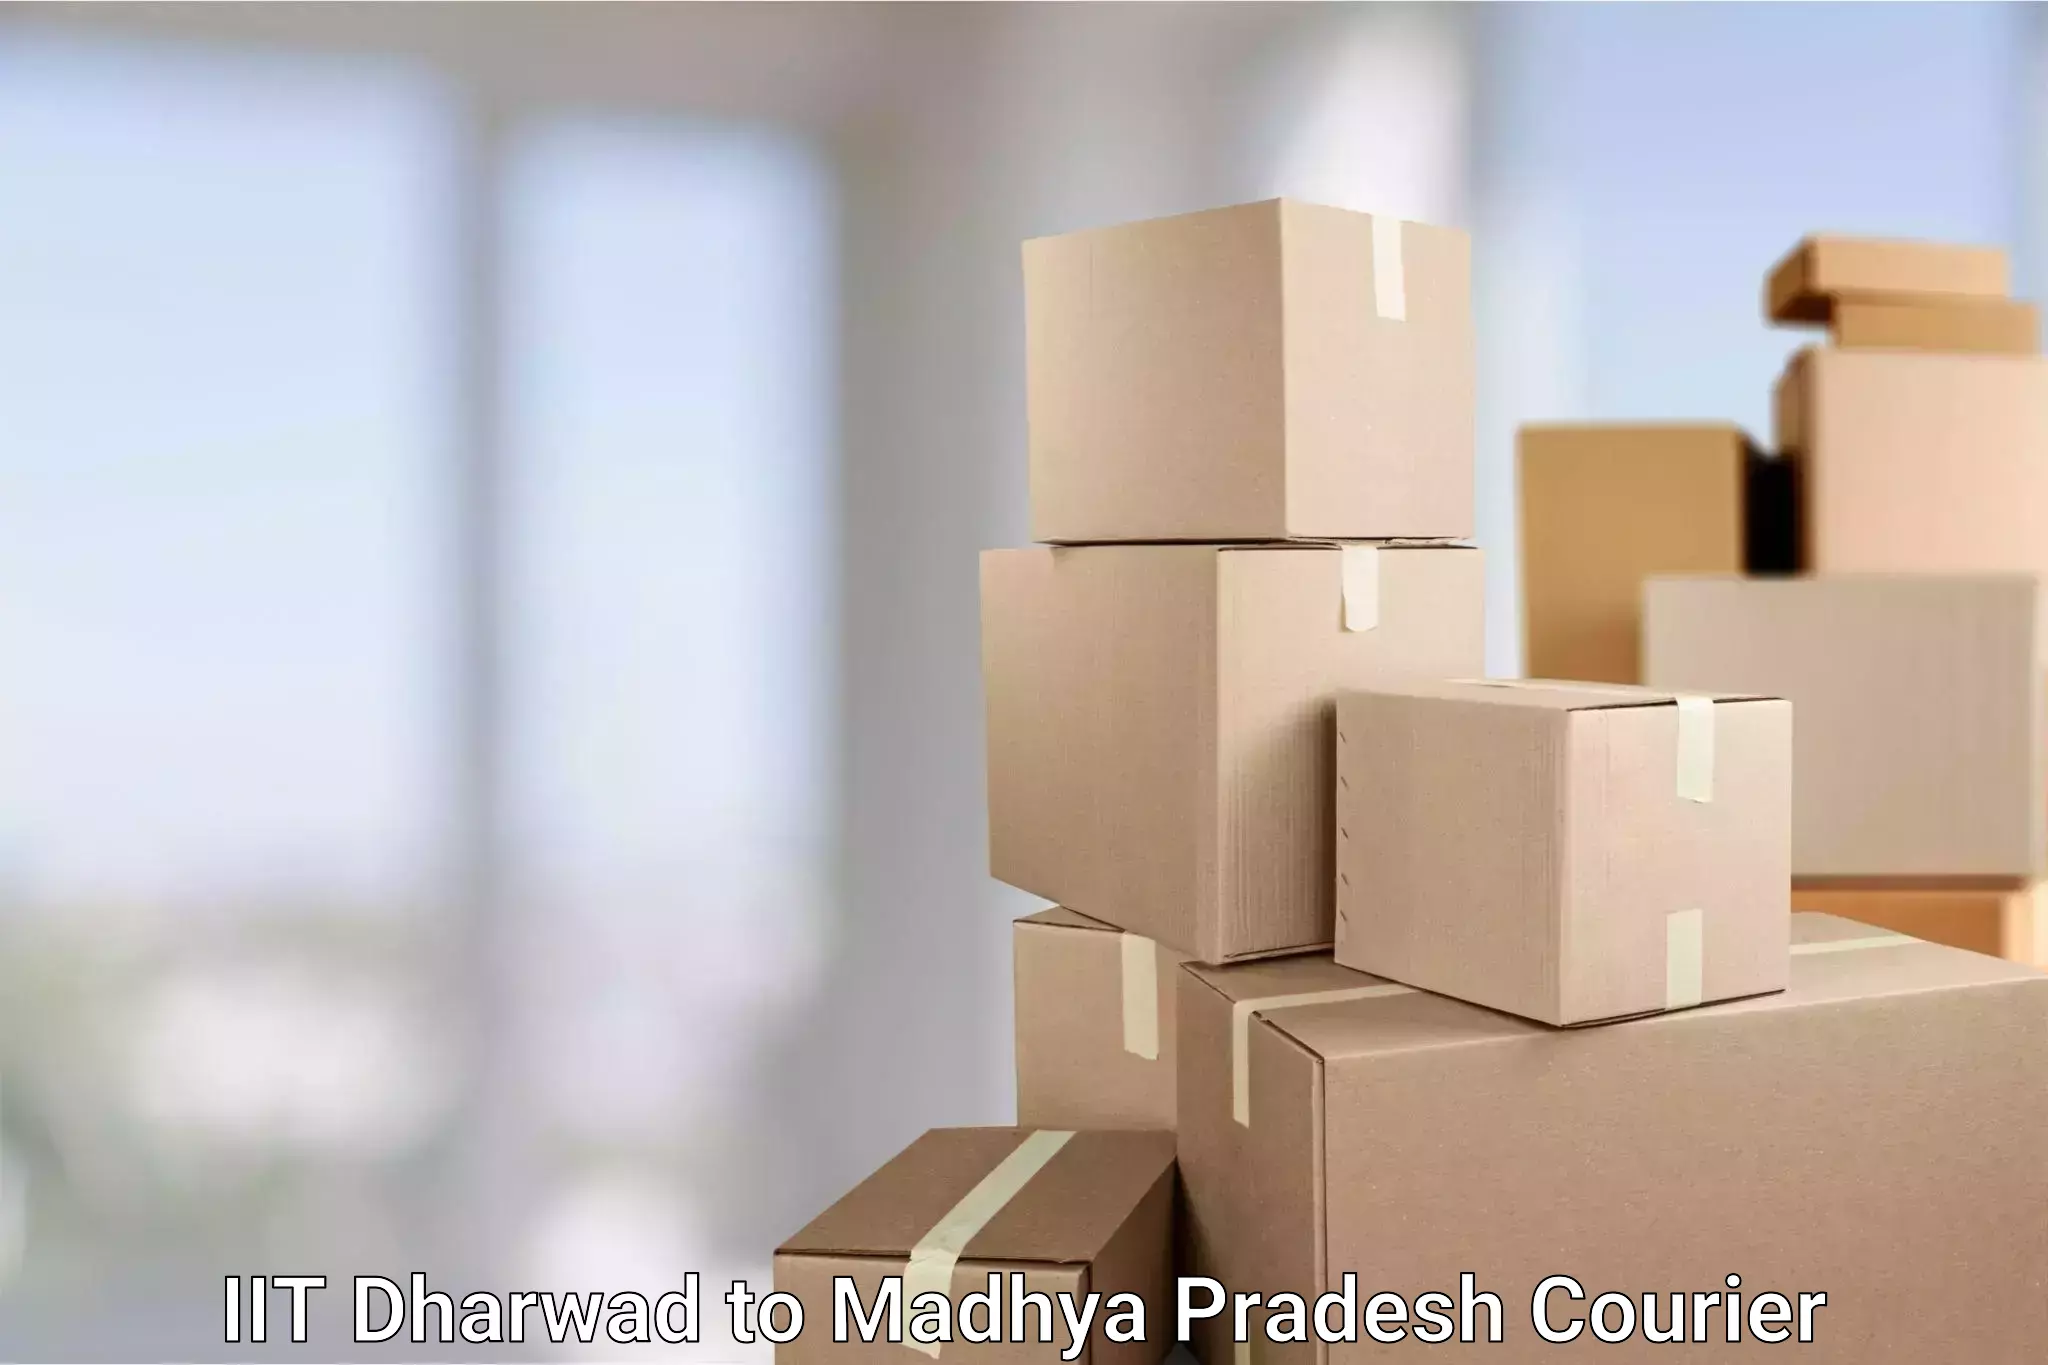 Personal parcel delivery in IIT Dharwad to Vidisha